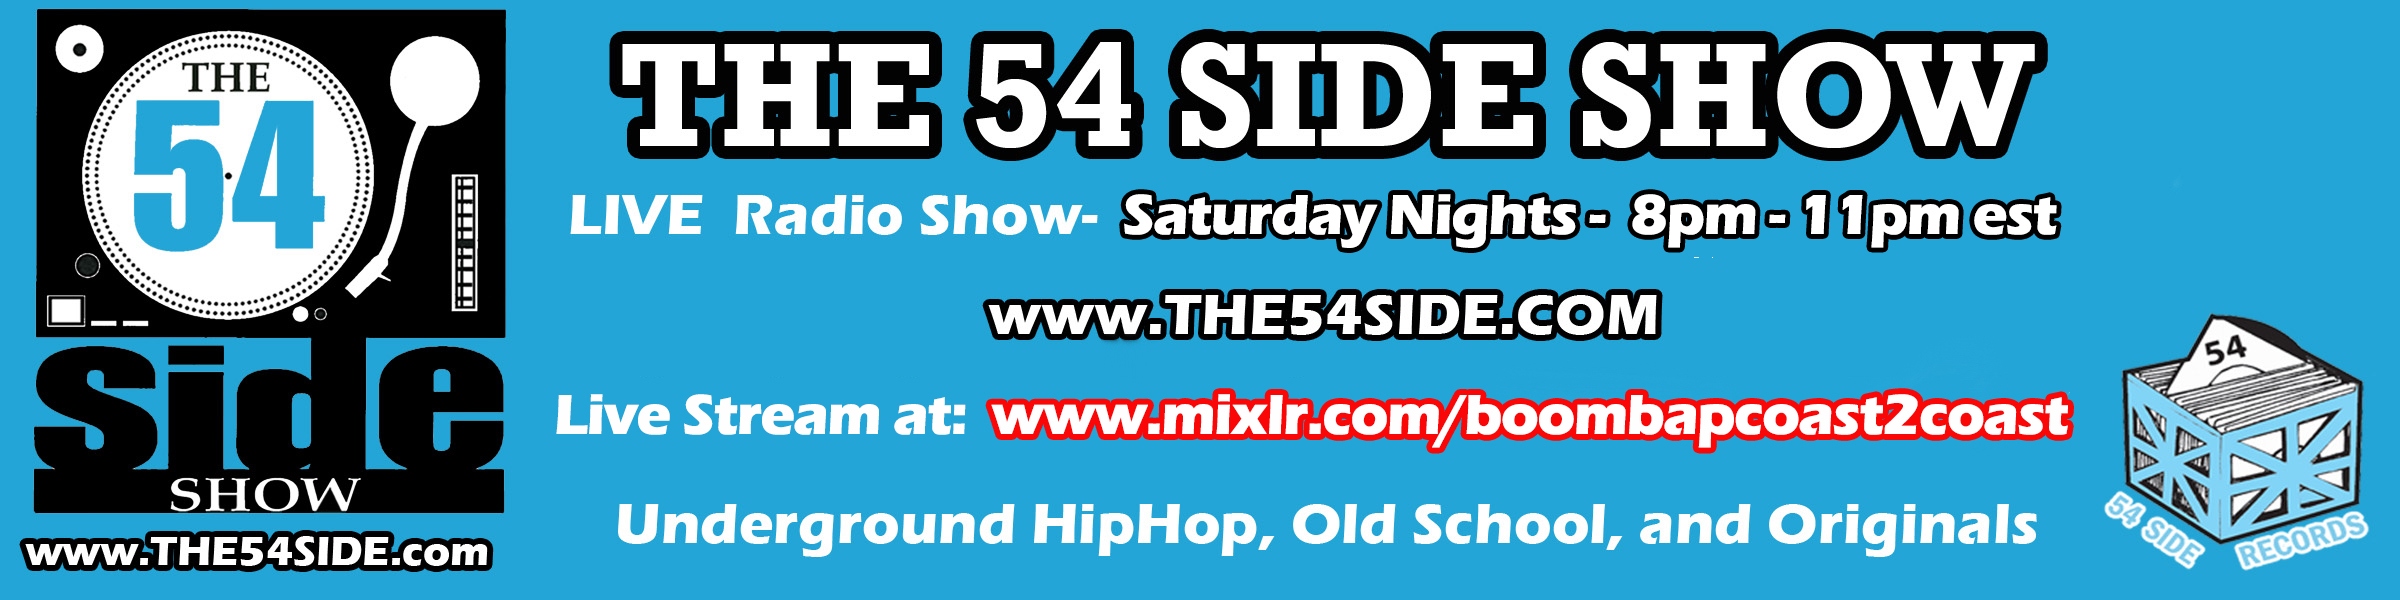 THE 54 SIDE SHOW on Mixlr